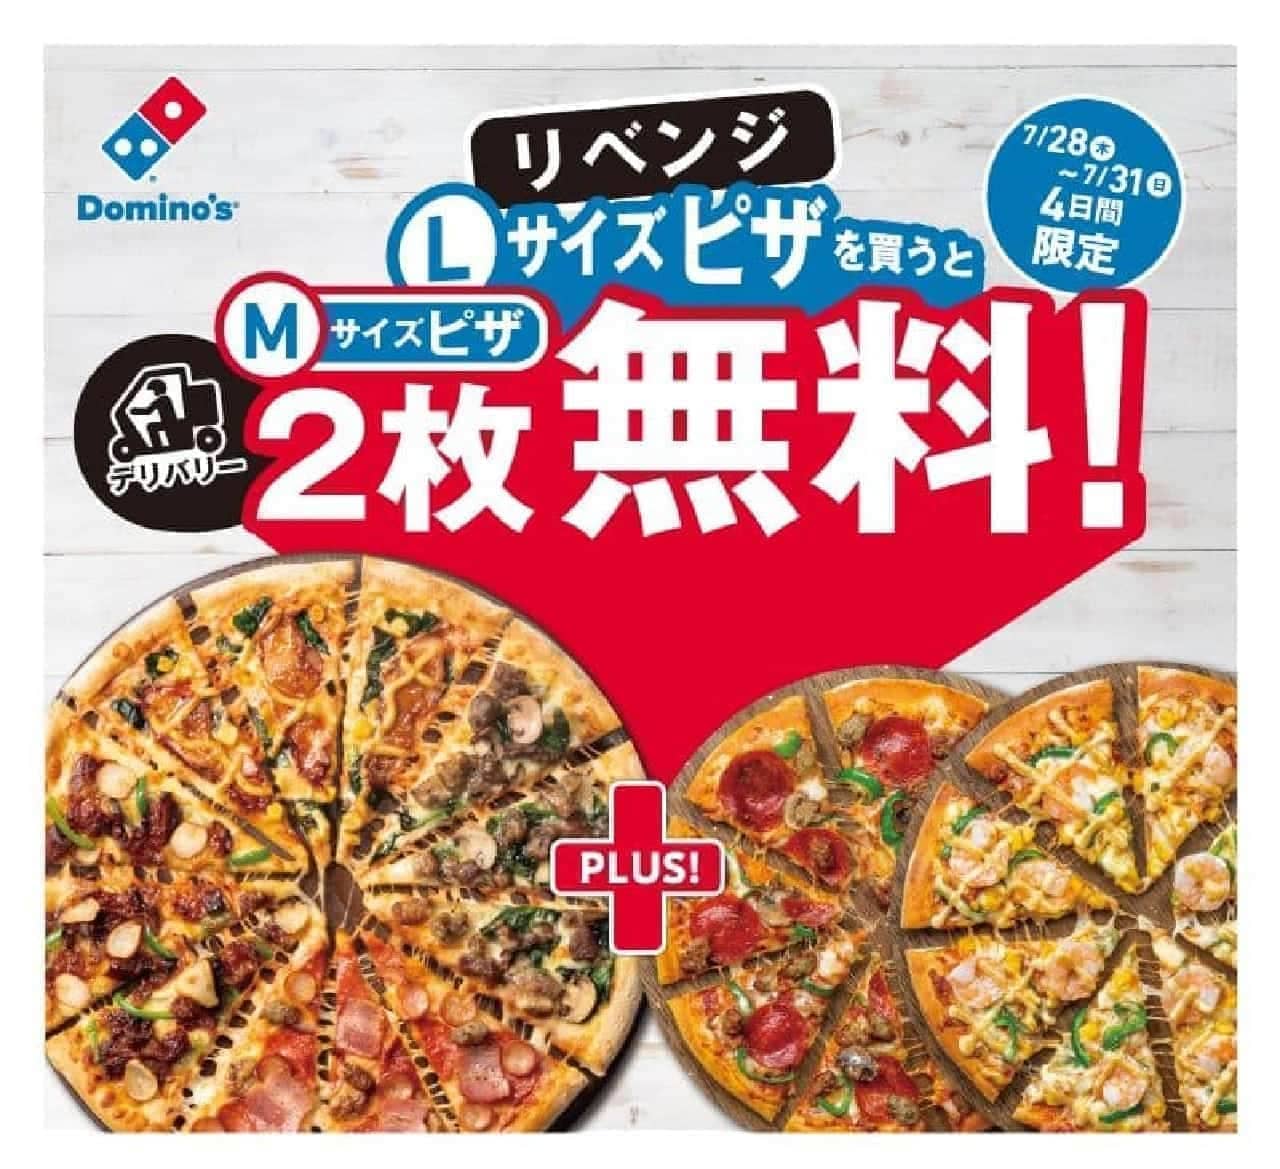 Domino's Pizza "Buy Delivery L-Size Pizza, Get 2 M-Size Pizzas Free! Revenge"